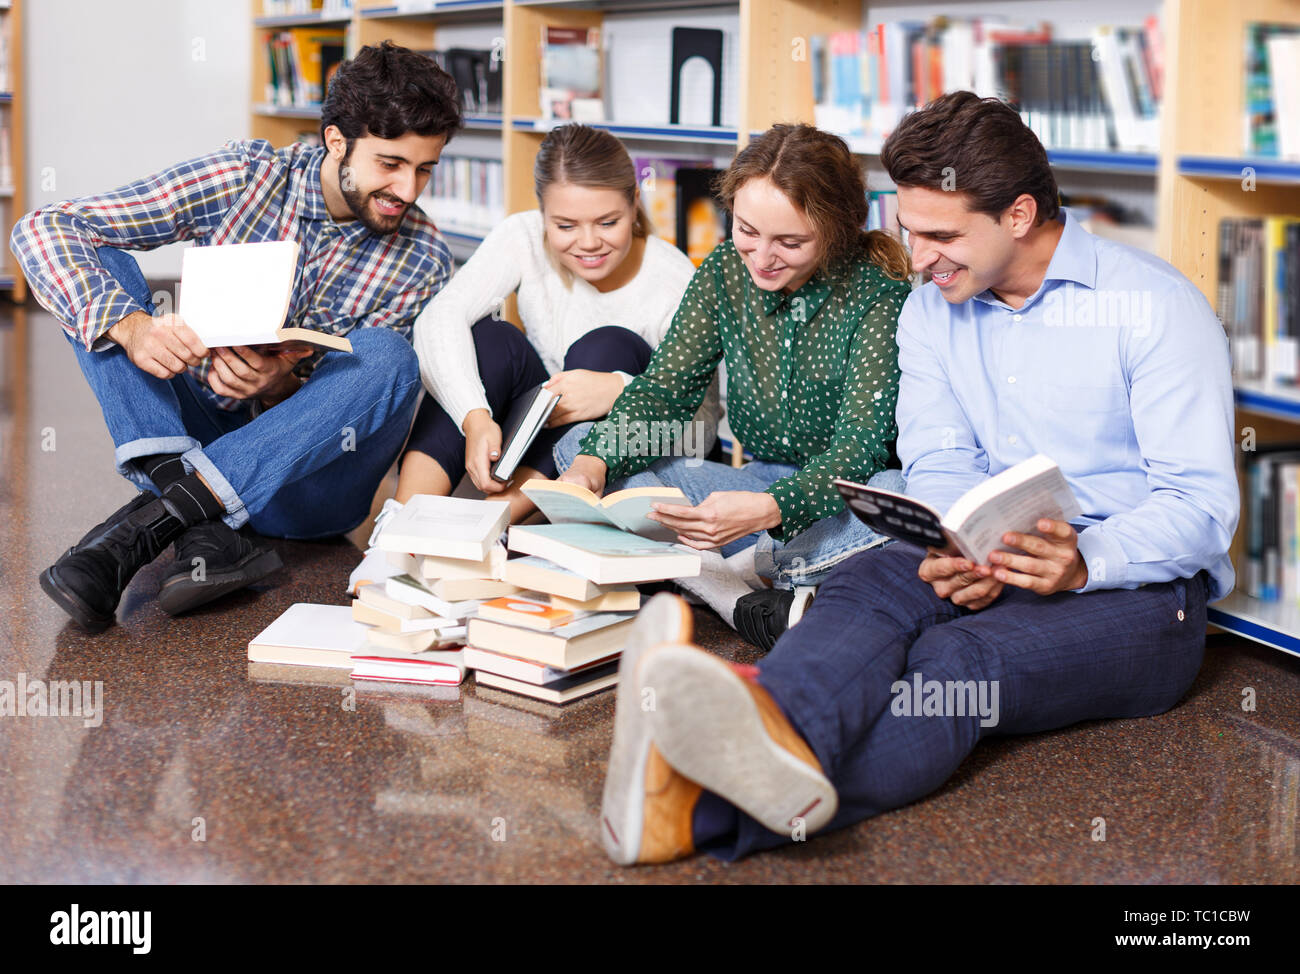 Four Happy Students Sitting On Floor In Library In Campus And